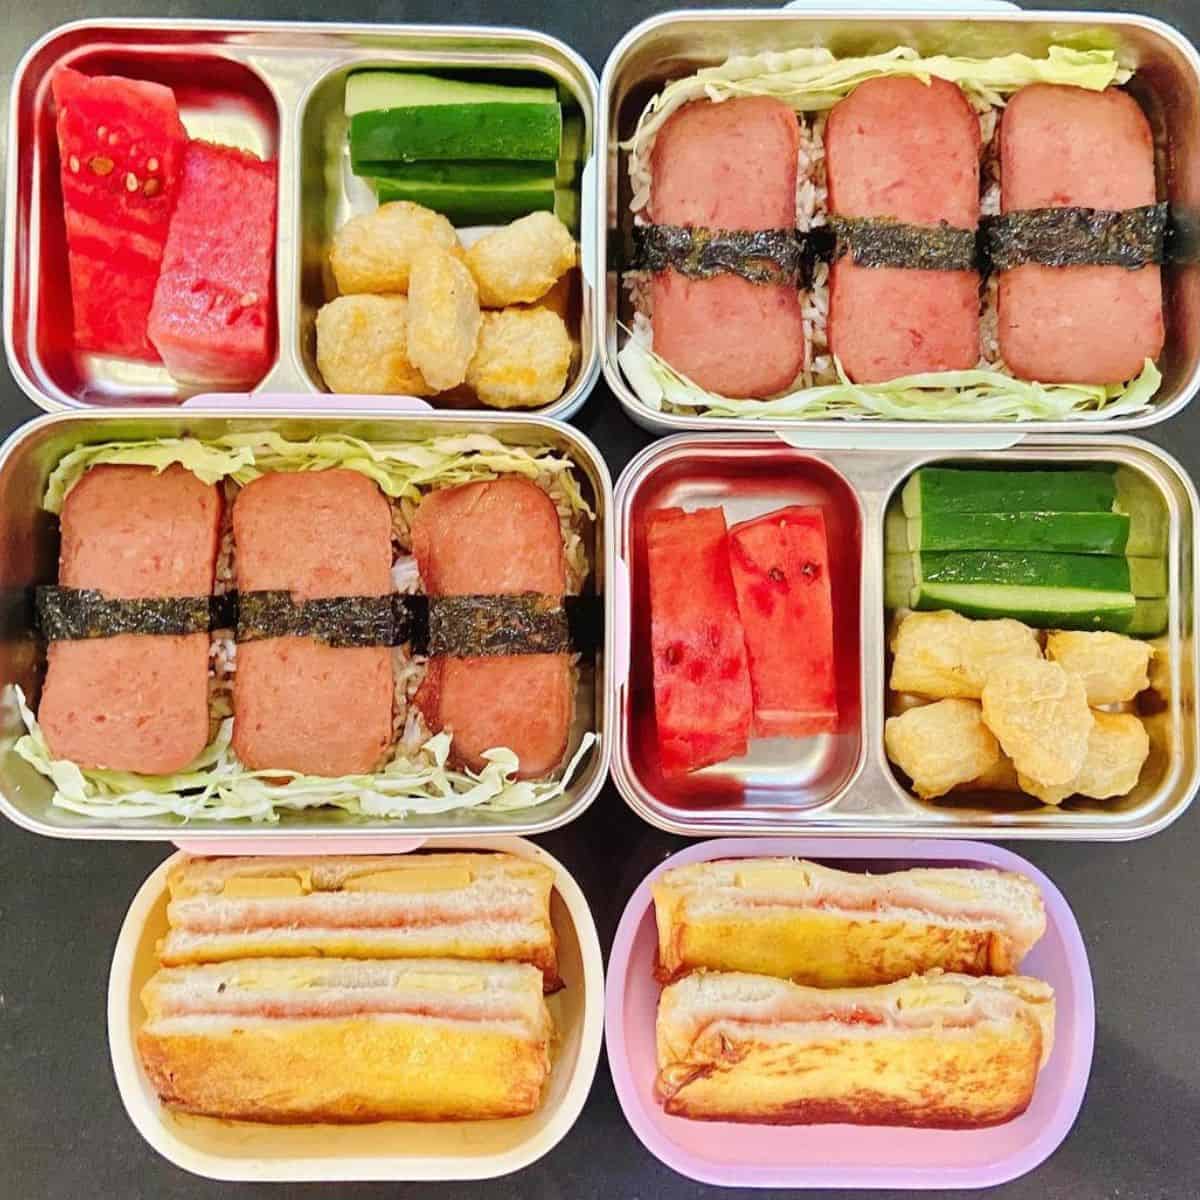 https://www.honestfoodtalks.com/wp-content/uploads/2023/05/Colourful-food-in-lunch-boxes.jpg